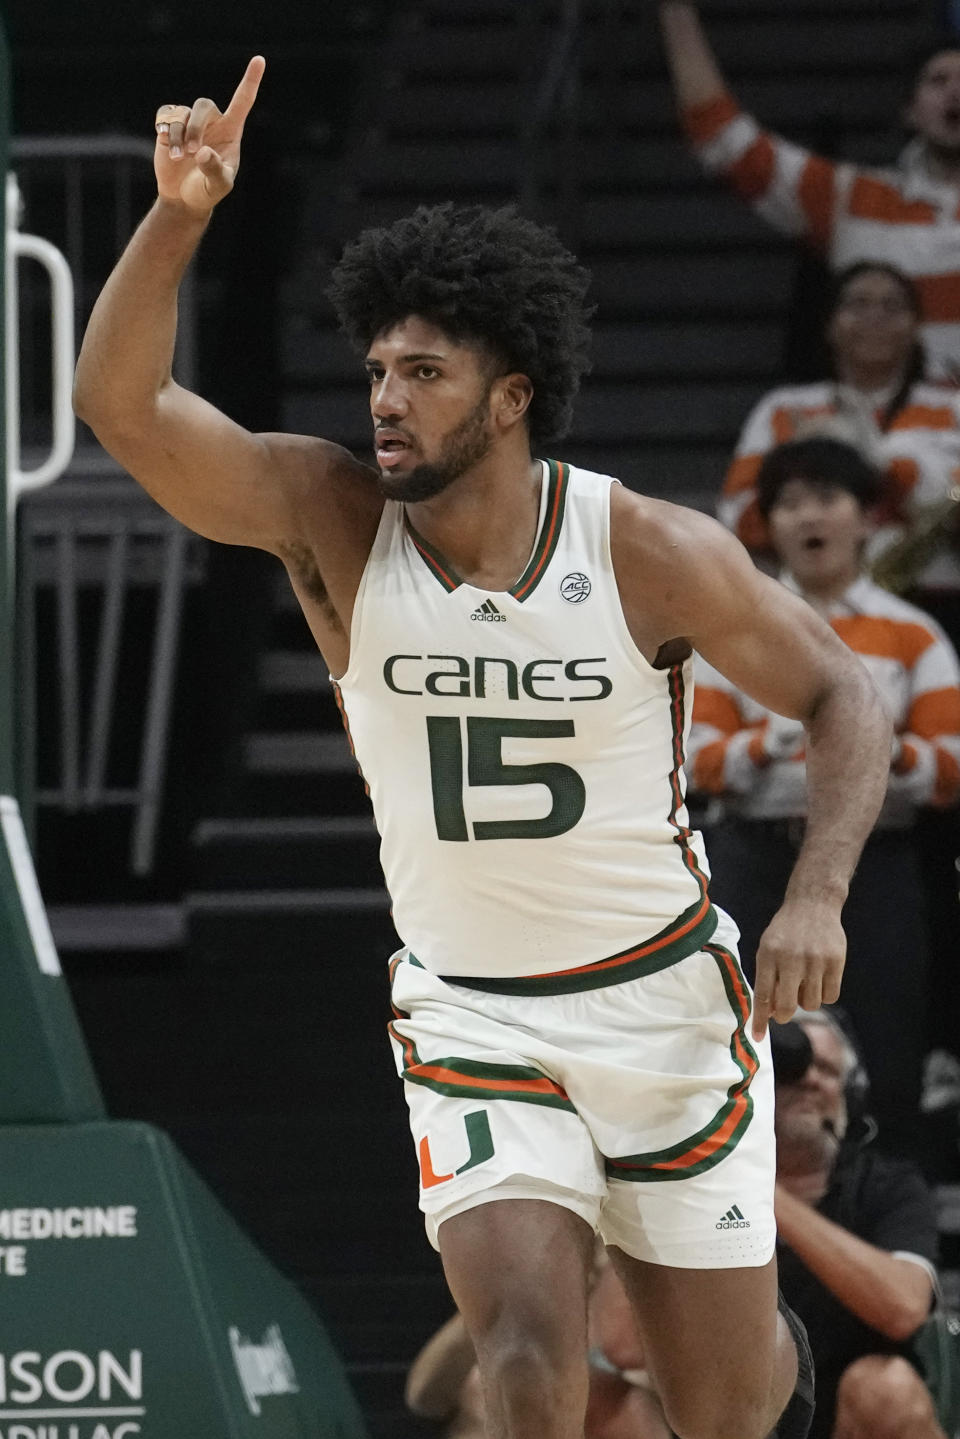 Miami forward Norchad Omier (15) gestures after dunking the ball during the first half of an NCAA college basketball game against Virginia Tech, Tuesday, Jan. 31, 2023, in Coral Gables, Fla. (AP Photo/Marta Lavandier)